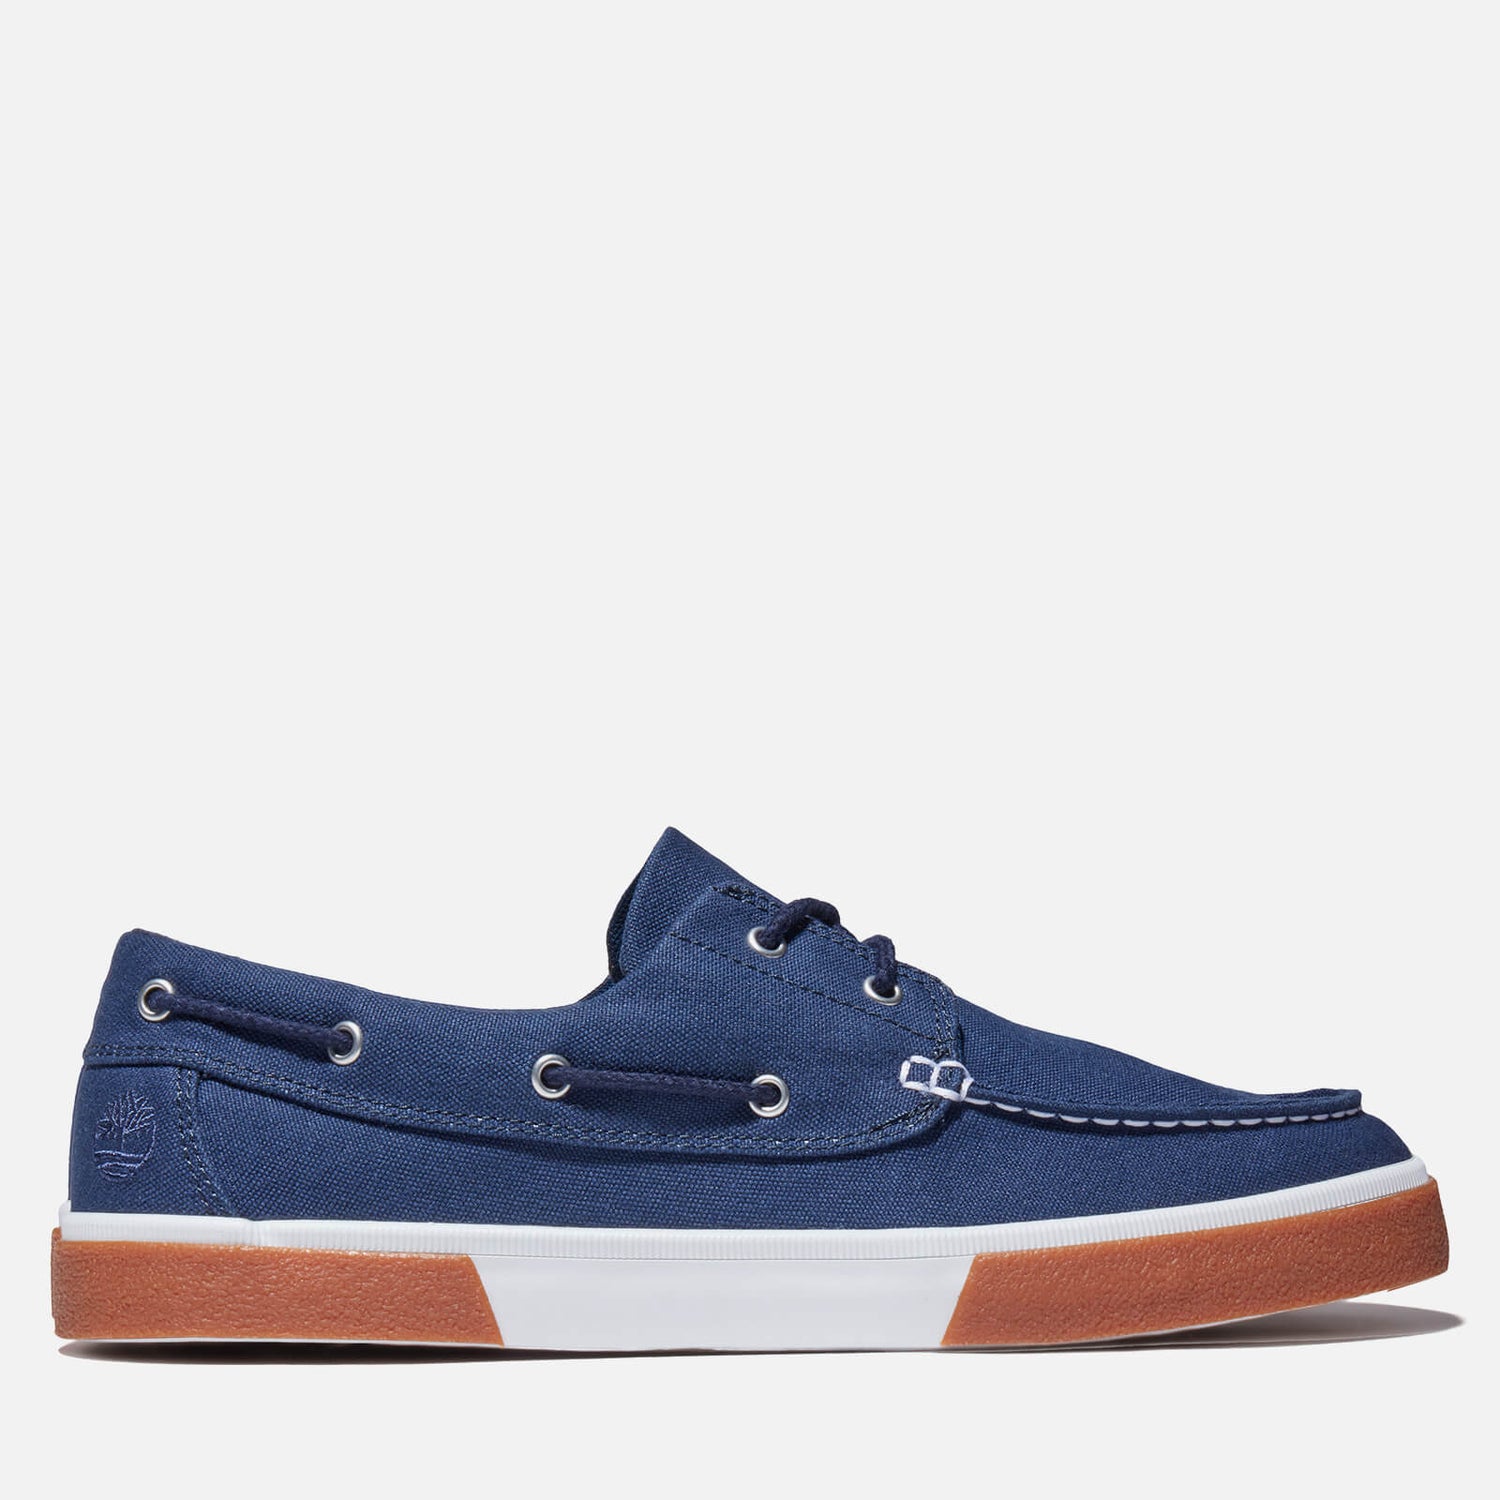 Timberland Men's Union Wharf Canvas Boat Shoes - Navy